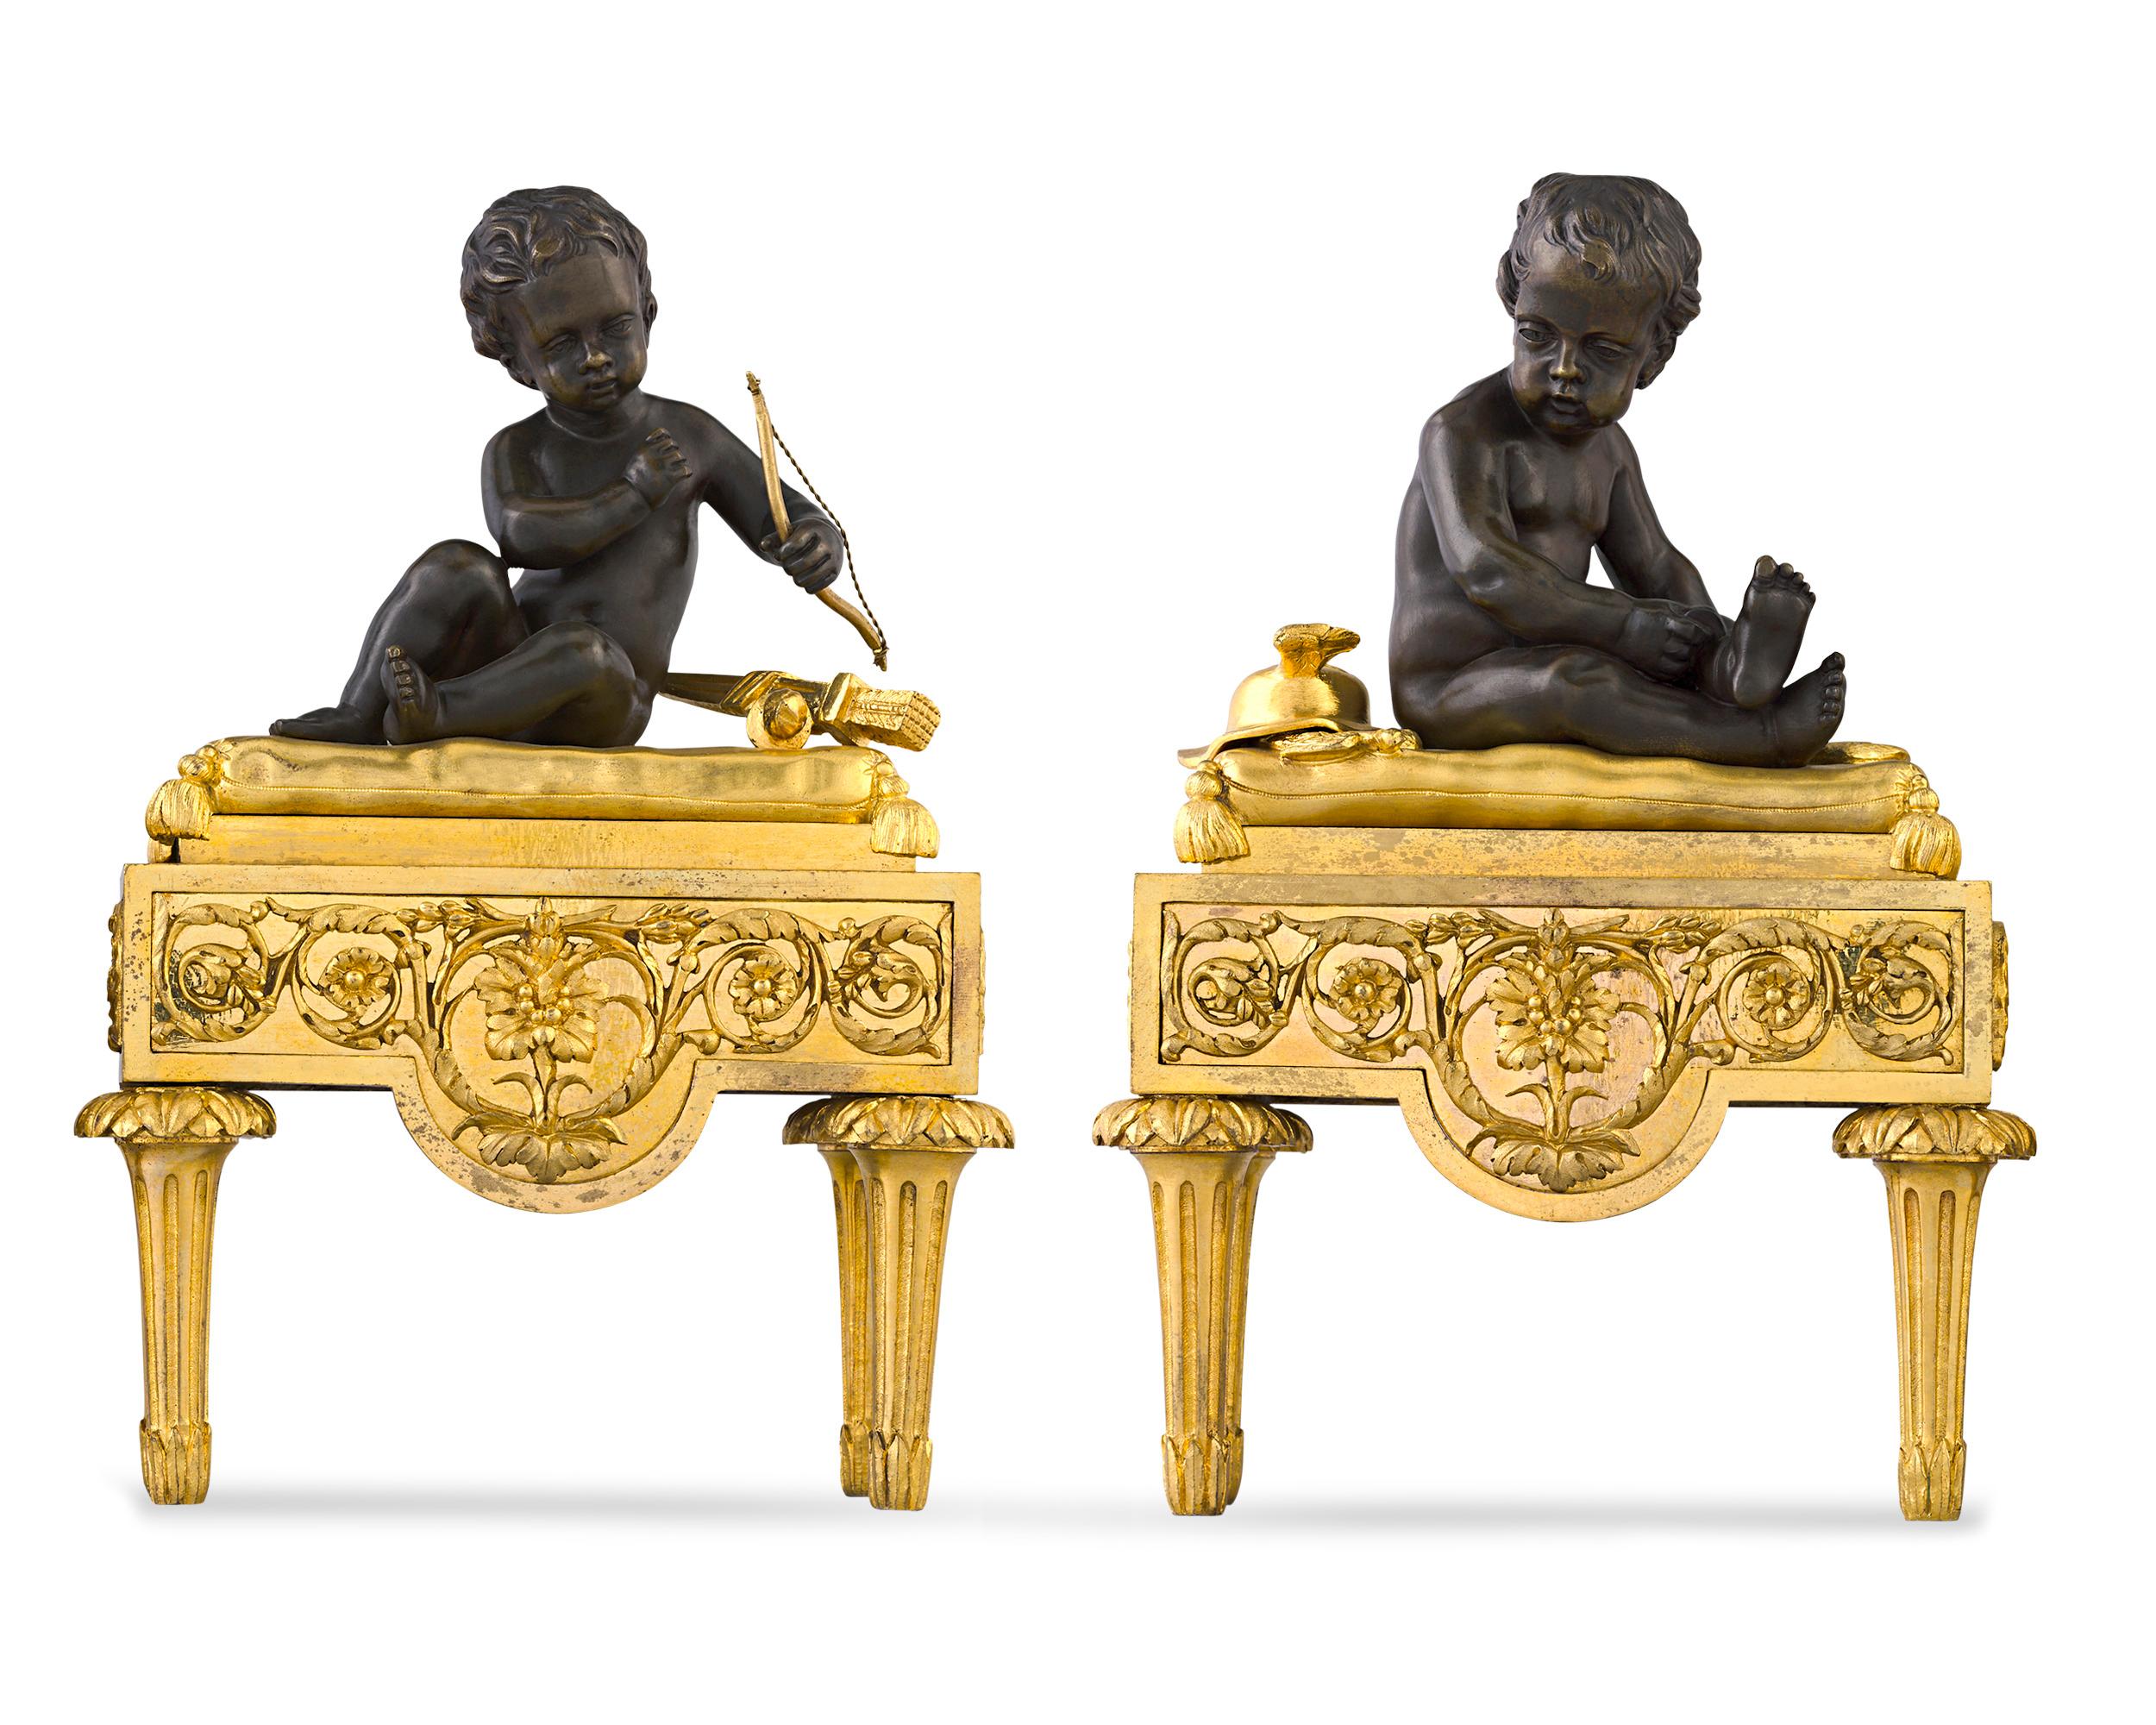 Cherubs representing the gods Cupid and Mercury, indicated by their respective bow and winged helmet, sit atop this charming pair of French chenets, or fireplace andirons. Crafted of stunning doré and patinated bronze, these figures display a